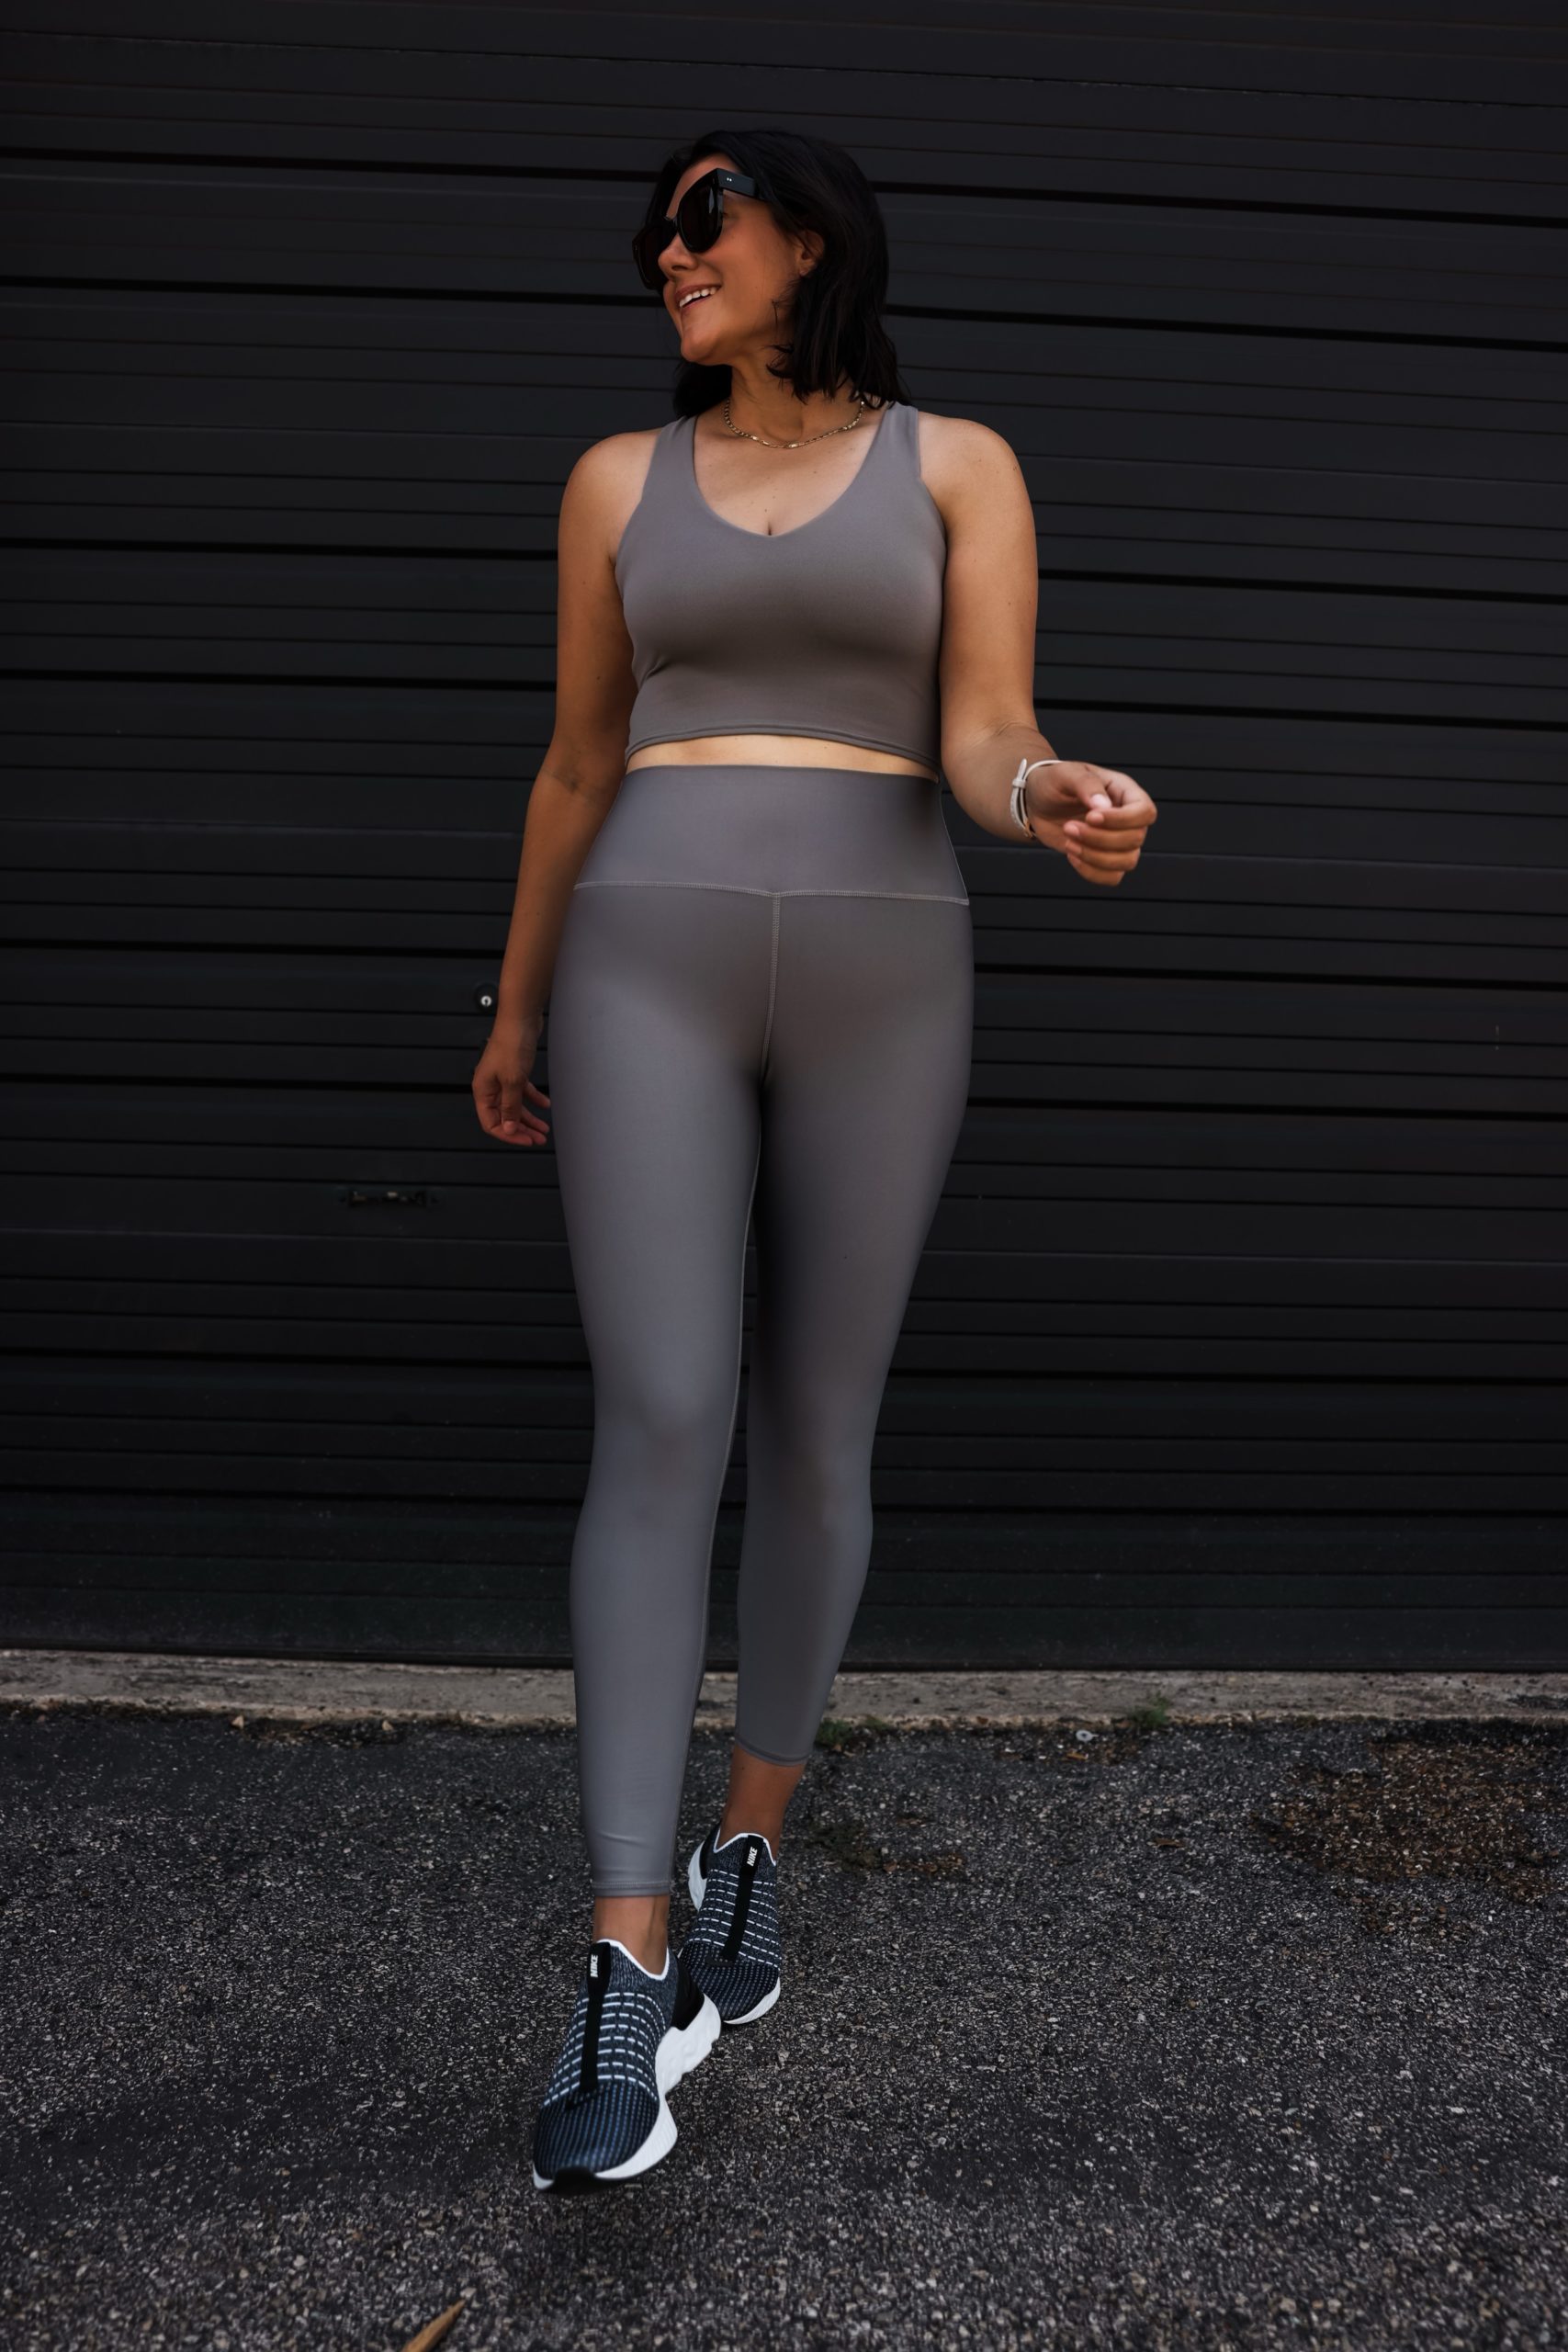 https://www.kendieveryday.com/wp-content/uploads/2021/07/Kendi-Everyday-wearig-Alo-Airlift-Leggings-outfit-11-scaled.jpg